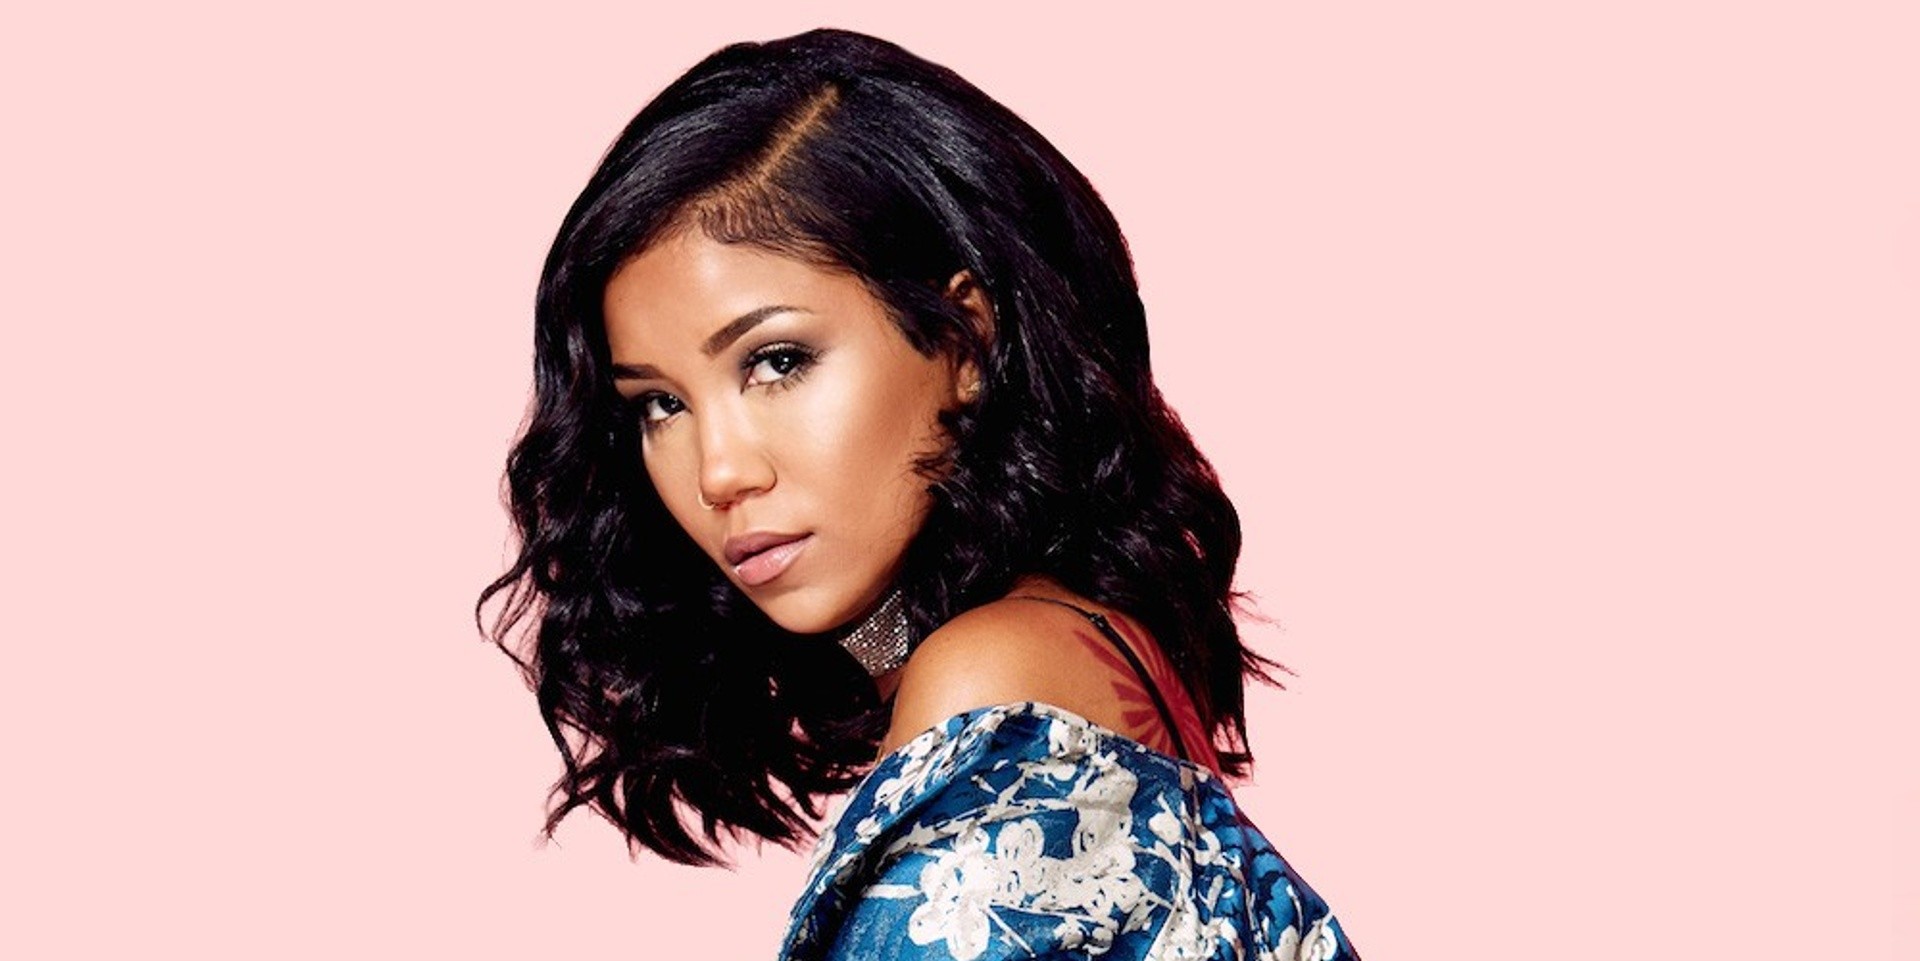 Jhené Aiko talks the Trip album, being a Pisces and a cat lady, and new music